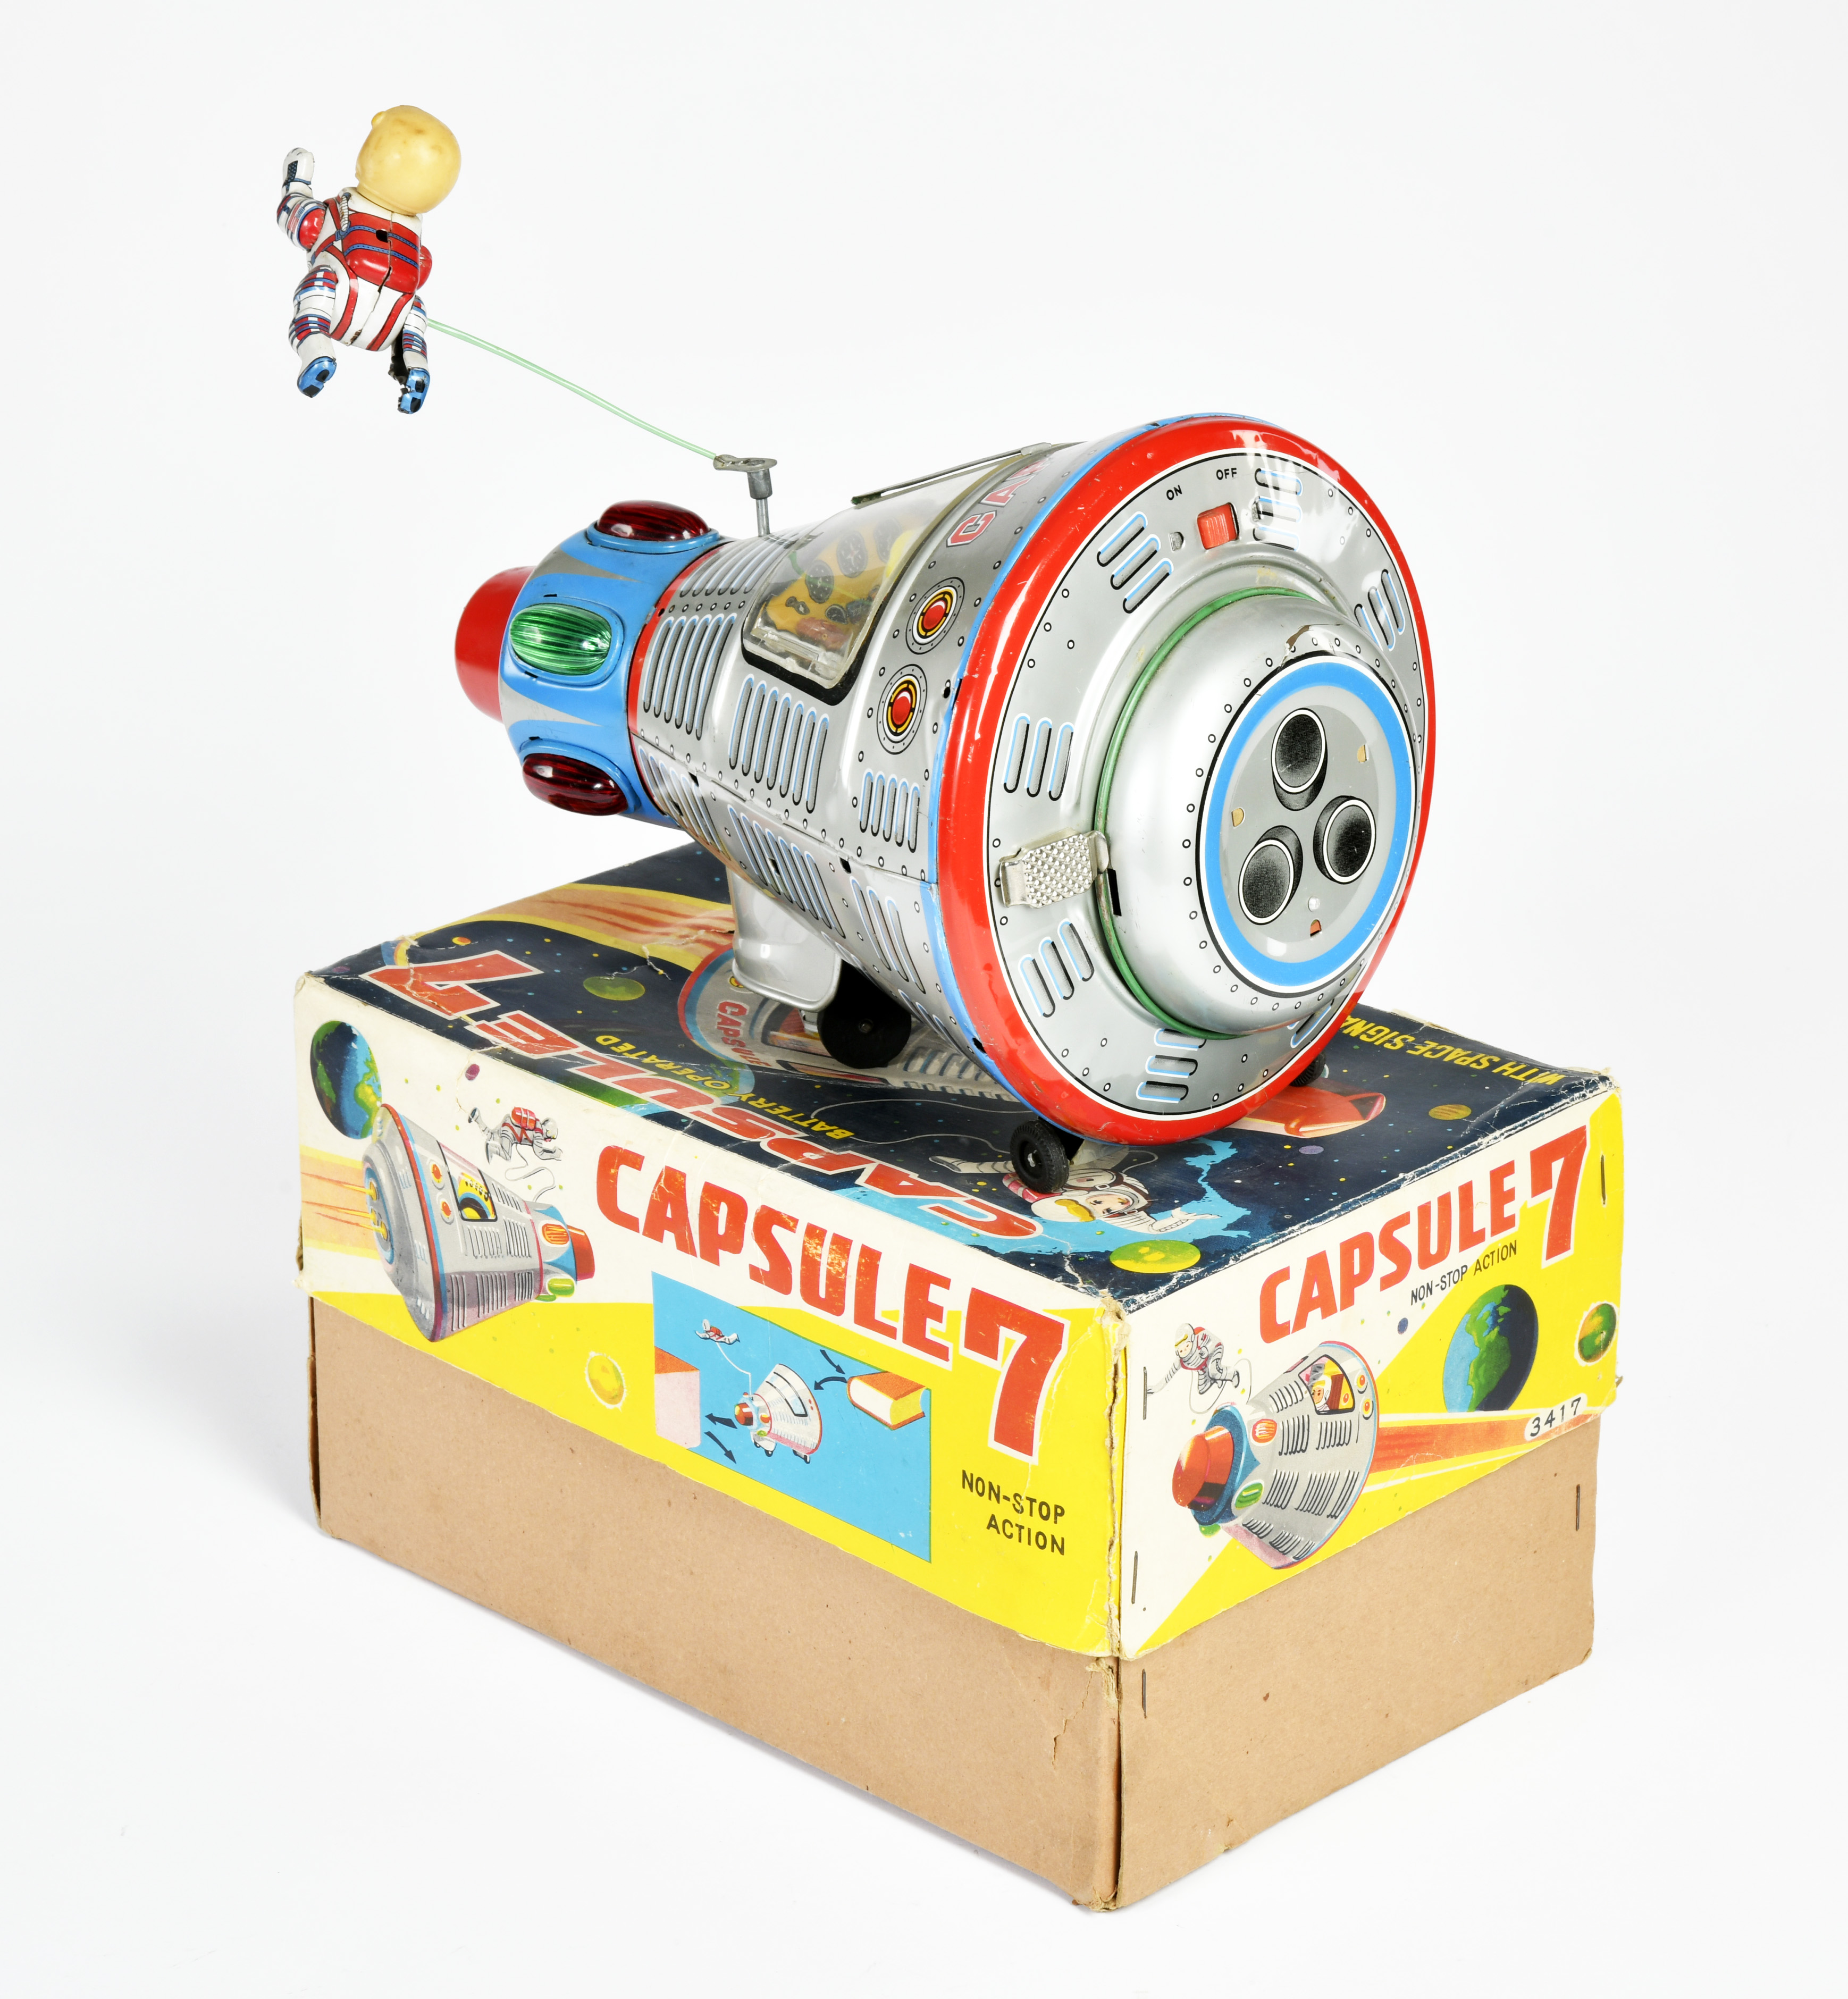 Modern Toys TM, Space Capsule 7, Japan, tin, drive not checked, paint d., box, C 2 - Image 2 of 3